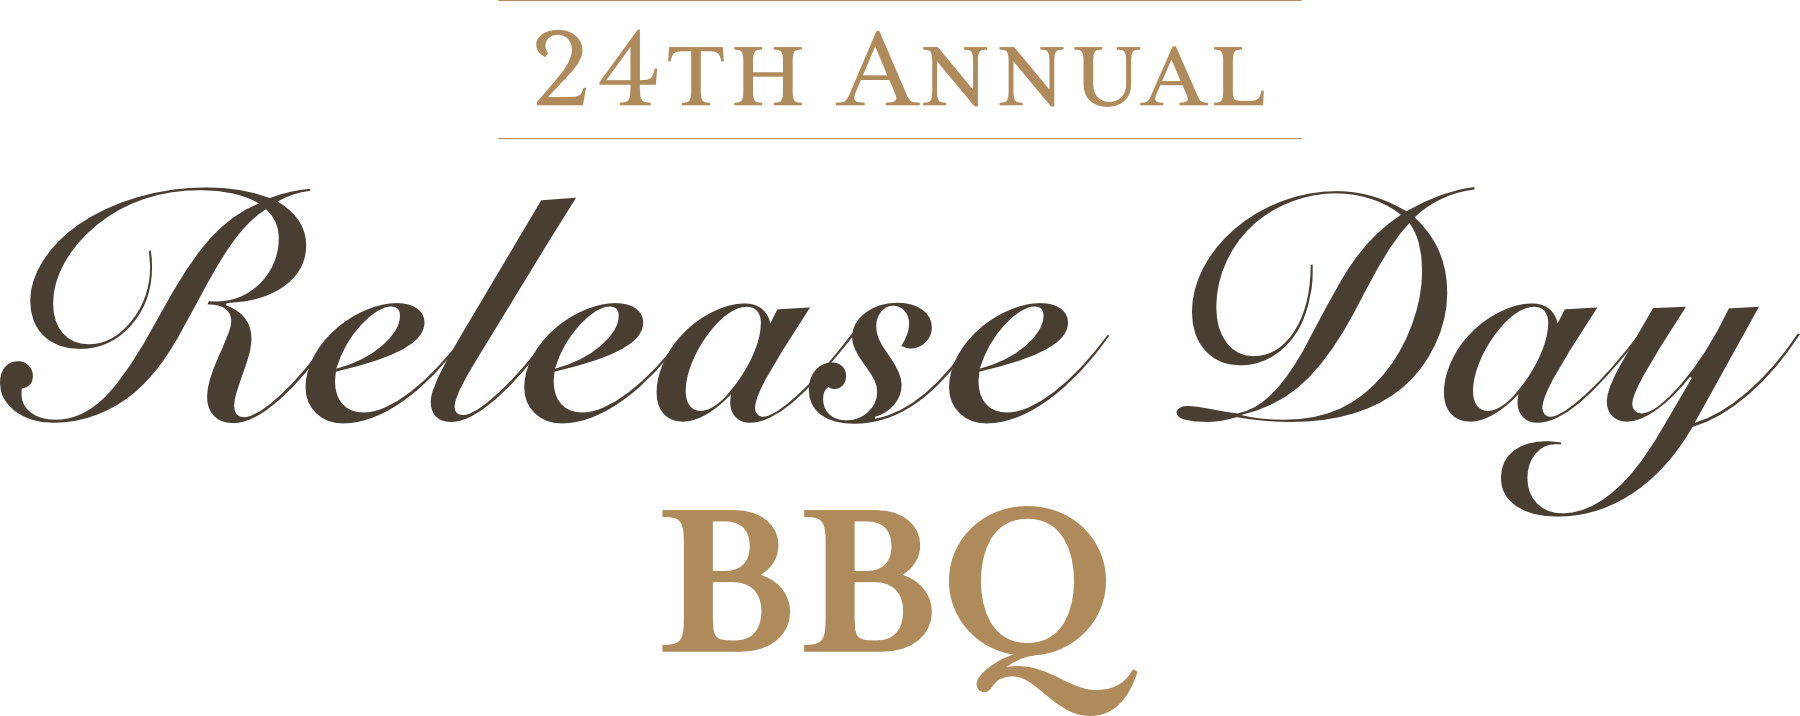 24th Annual Release Day BBQ